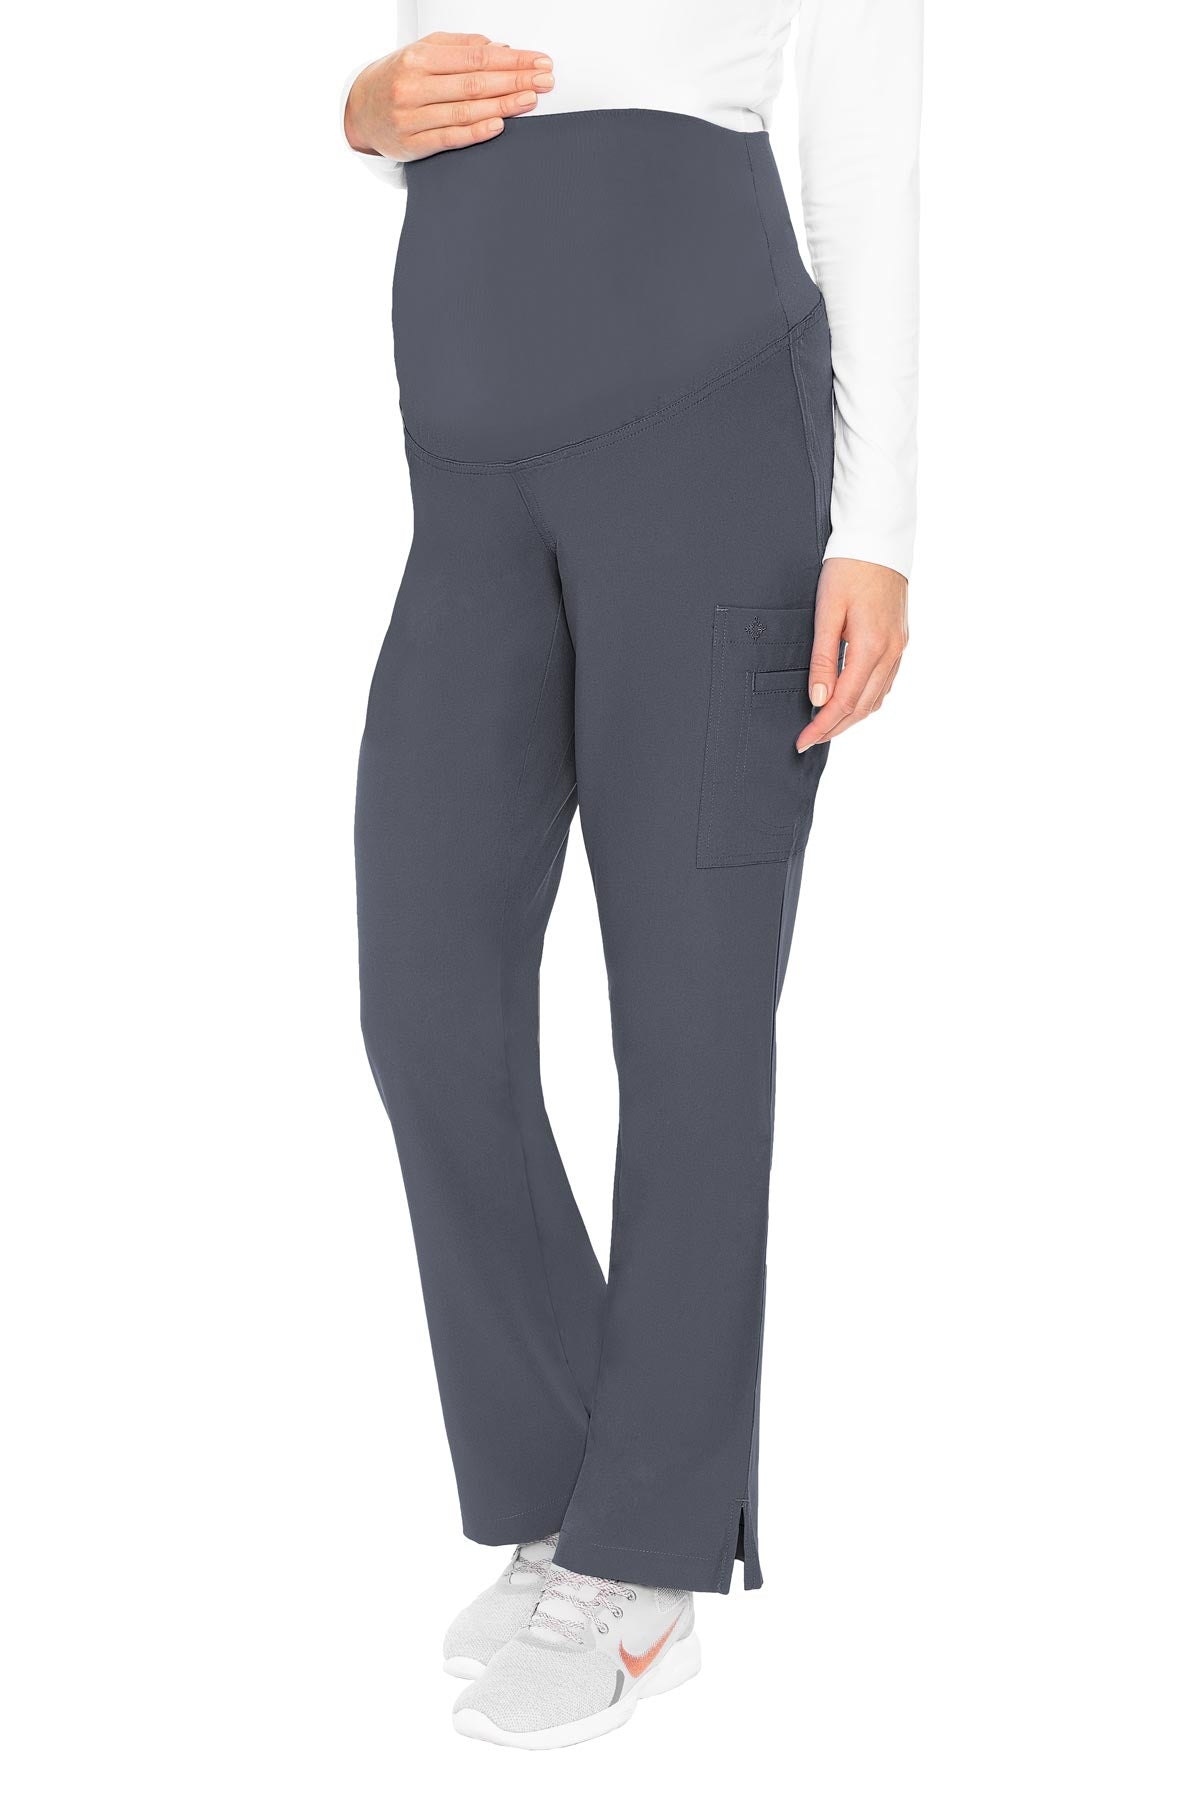 Med Couture Pewter PANT